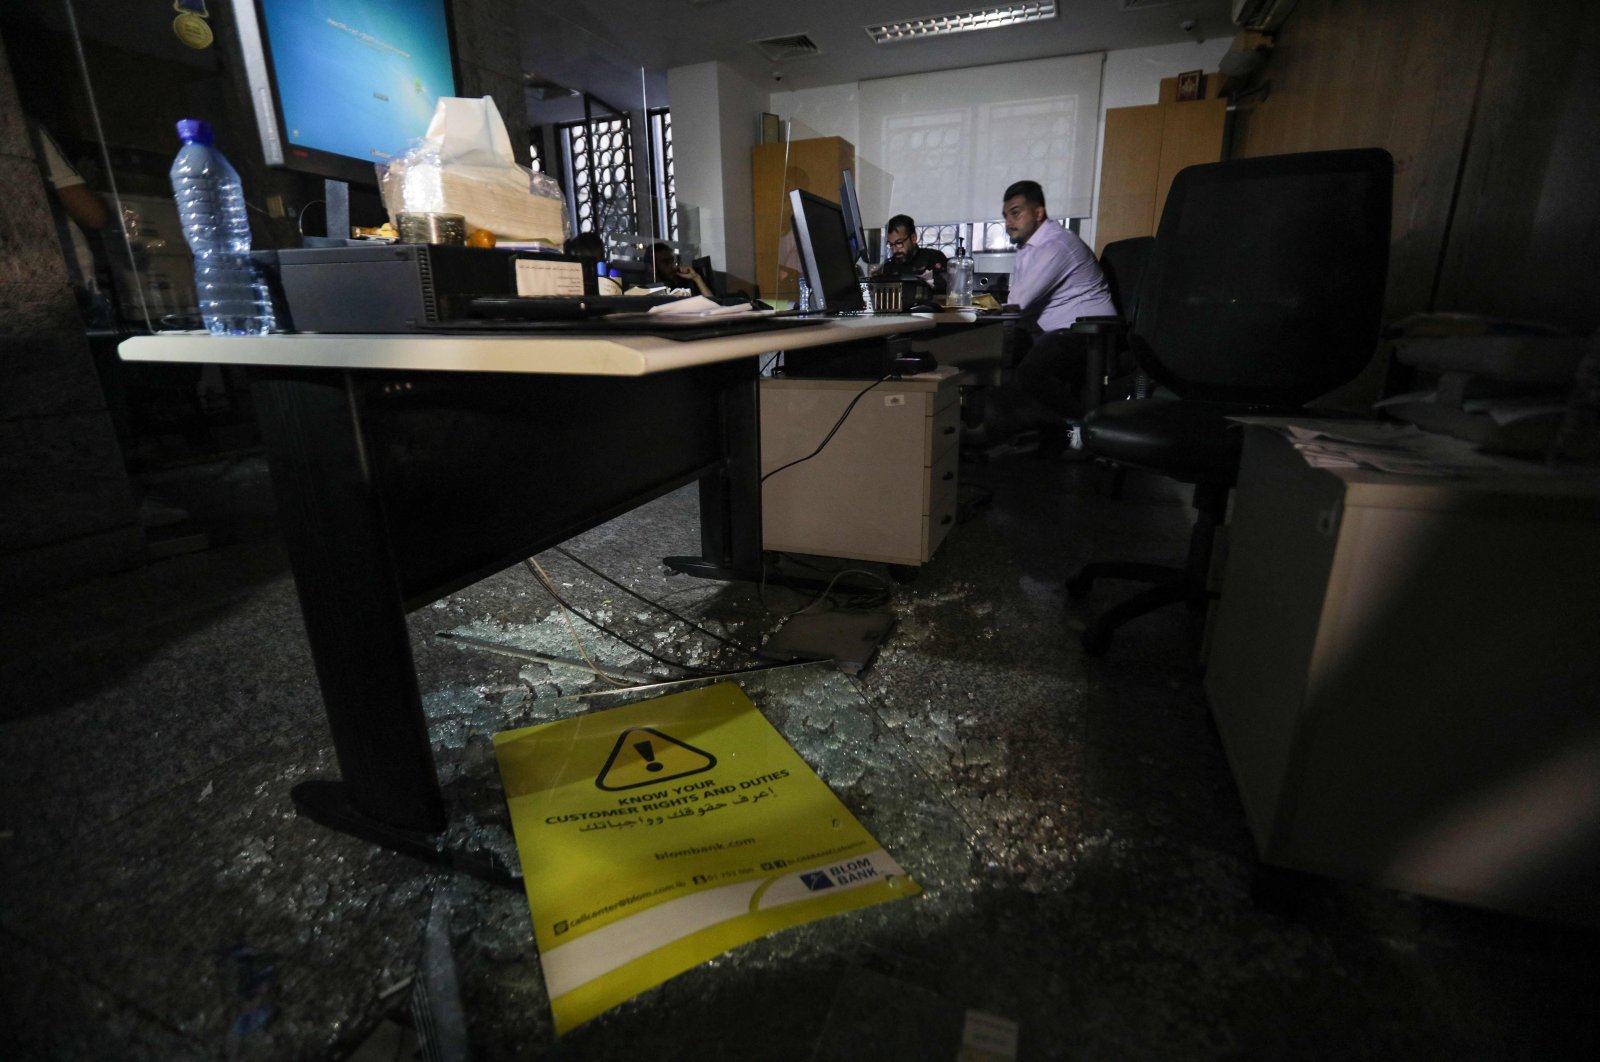 Broken glass is scattered on the floor of the Blom Bank branch in the Tariq al-Jdideh neighborhood, after depositor Abed Soubra stormed it, later surrendered his weapon to security forces and remained inside the bank demanding to withdraw his frozen savings, Beirut, Lebanon, Sept. 16, 2022. (AFP Photo)